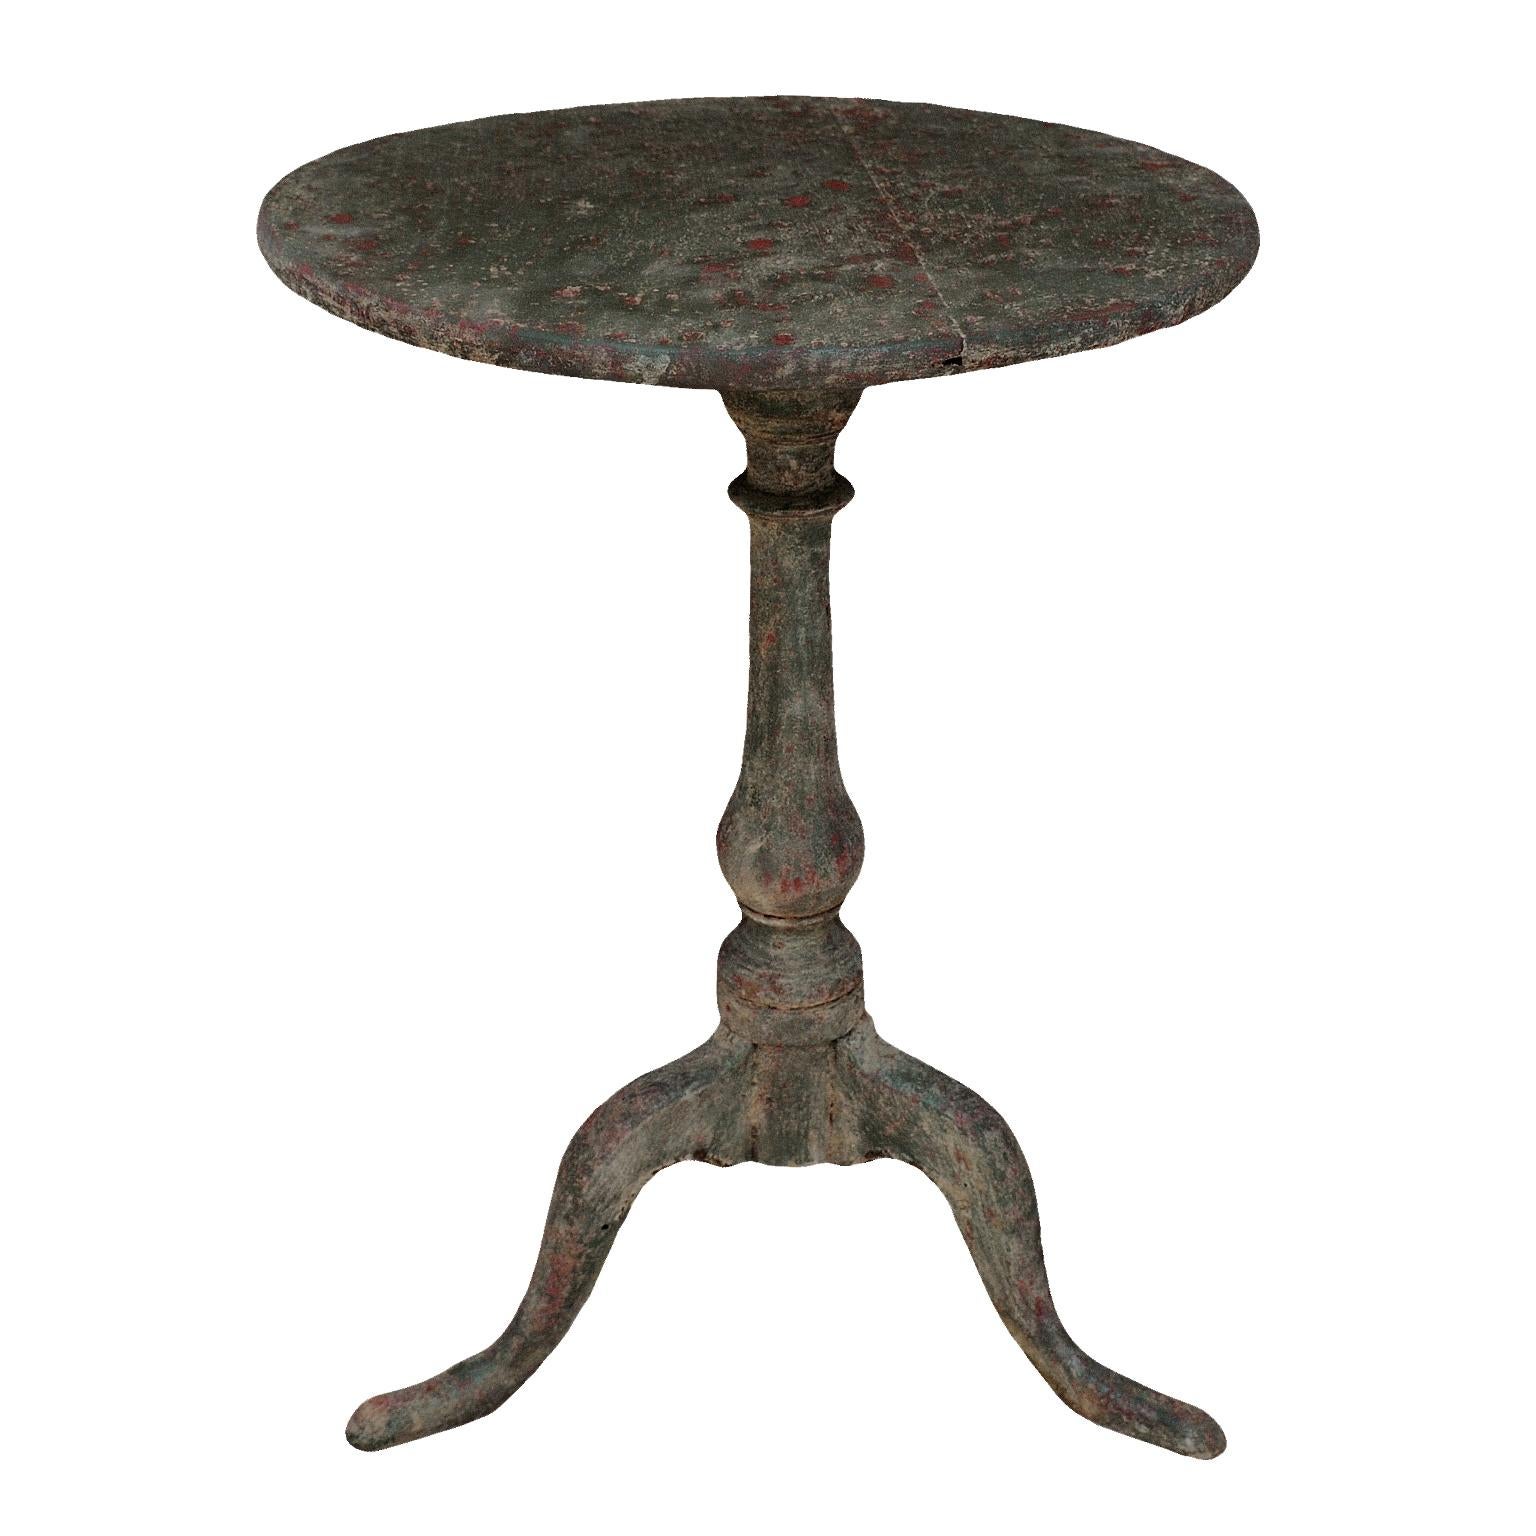 This is a beautifully proportioned small mid-18th century English George III painted tripod table with turned baluster column and standing on slender pad feet, circa 1760.
Paintwork refreshed.